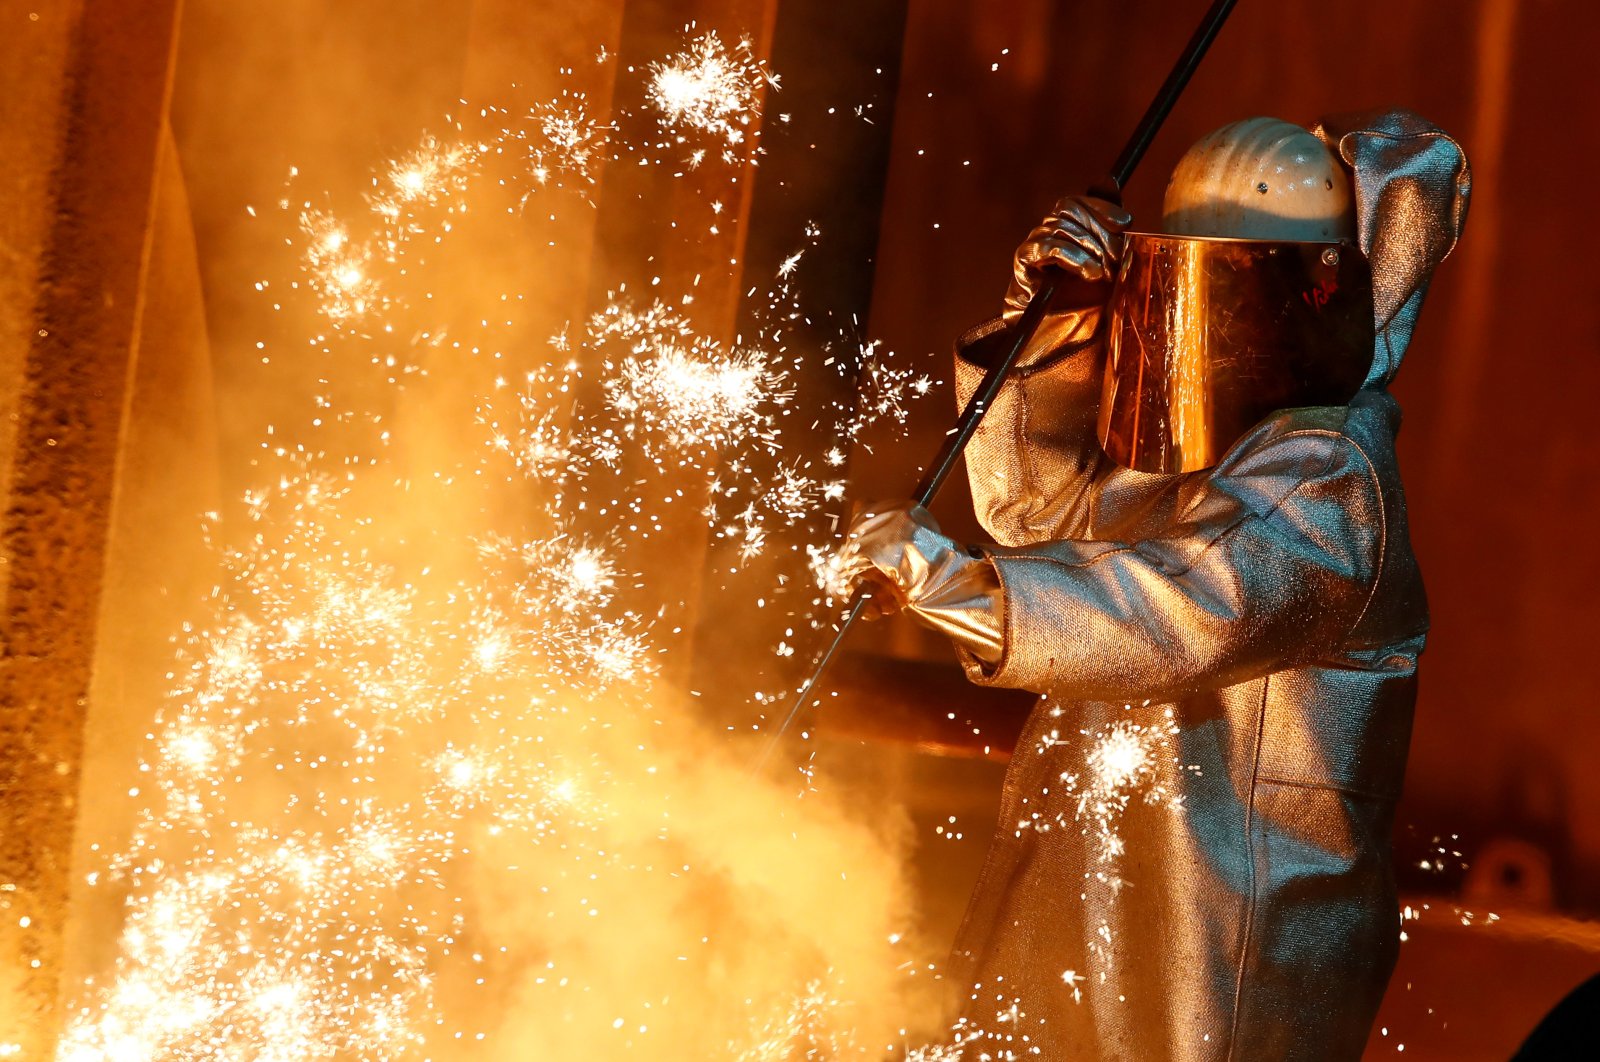 A steel worker of ThyssenKrupp stands amid sparks of raw iron coming from a blast furnace at a ThyssenKrupp steel factory in Duisburg, western Germany, Jan. 30, 2020. (Reuters Photo)